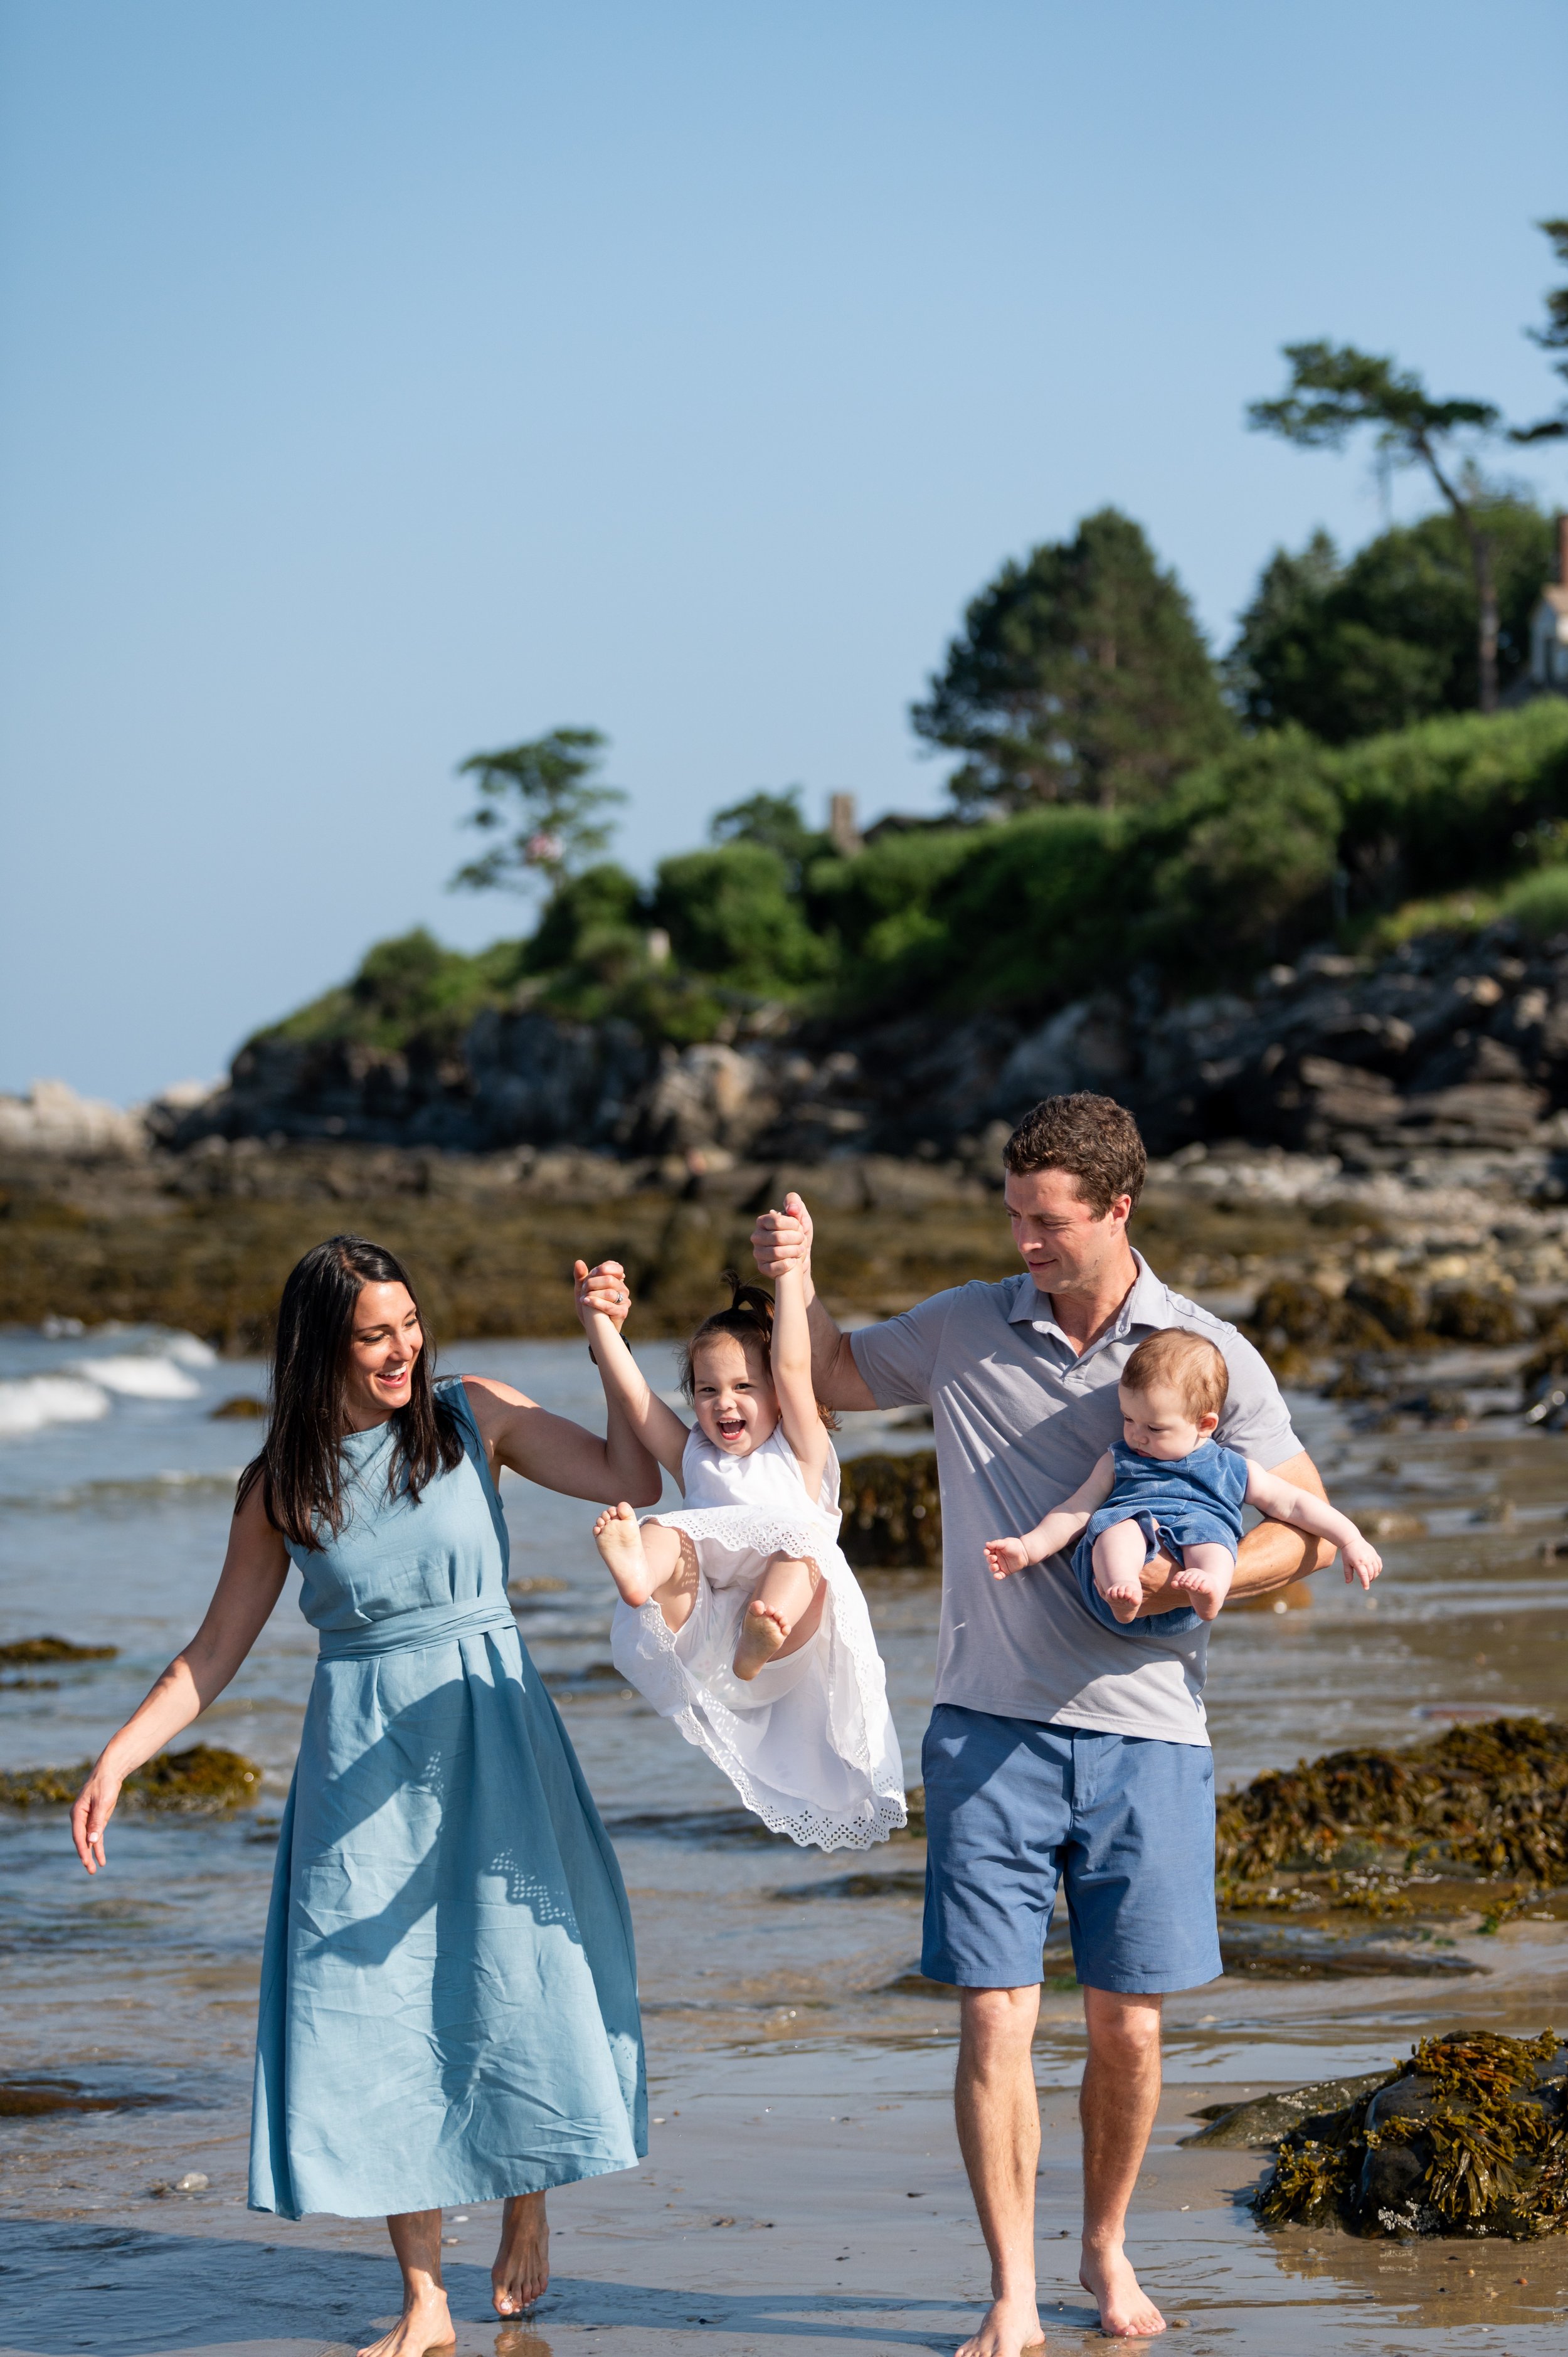 lindsay murphy photography | portland maine family photographer | prouts neck family swinging on beach laughing.jpg